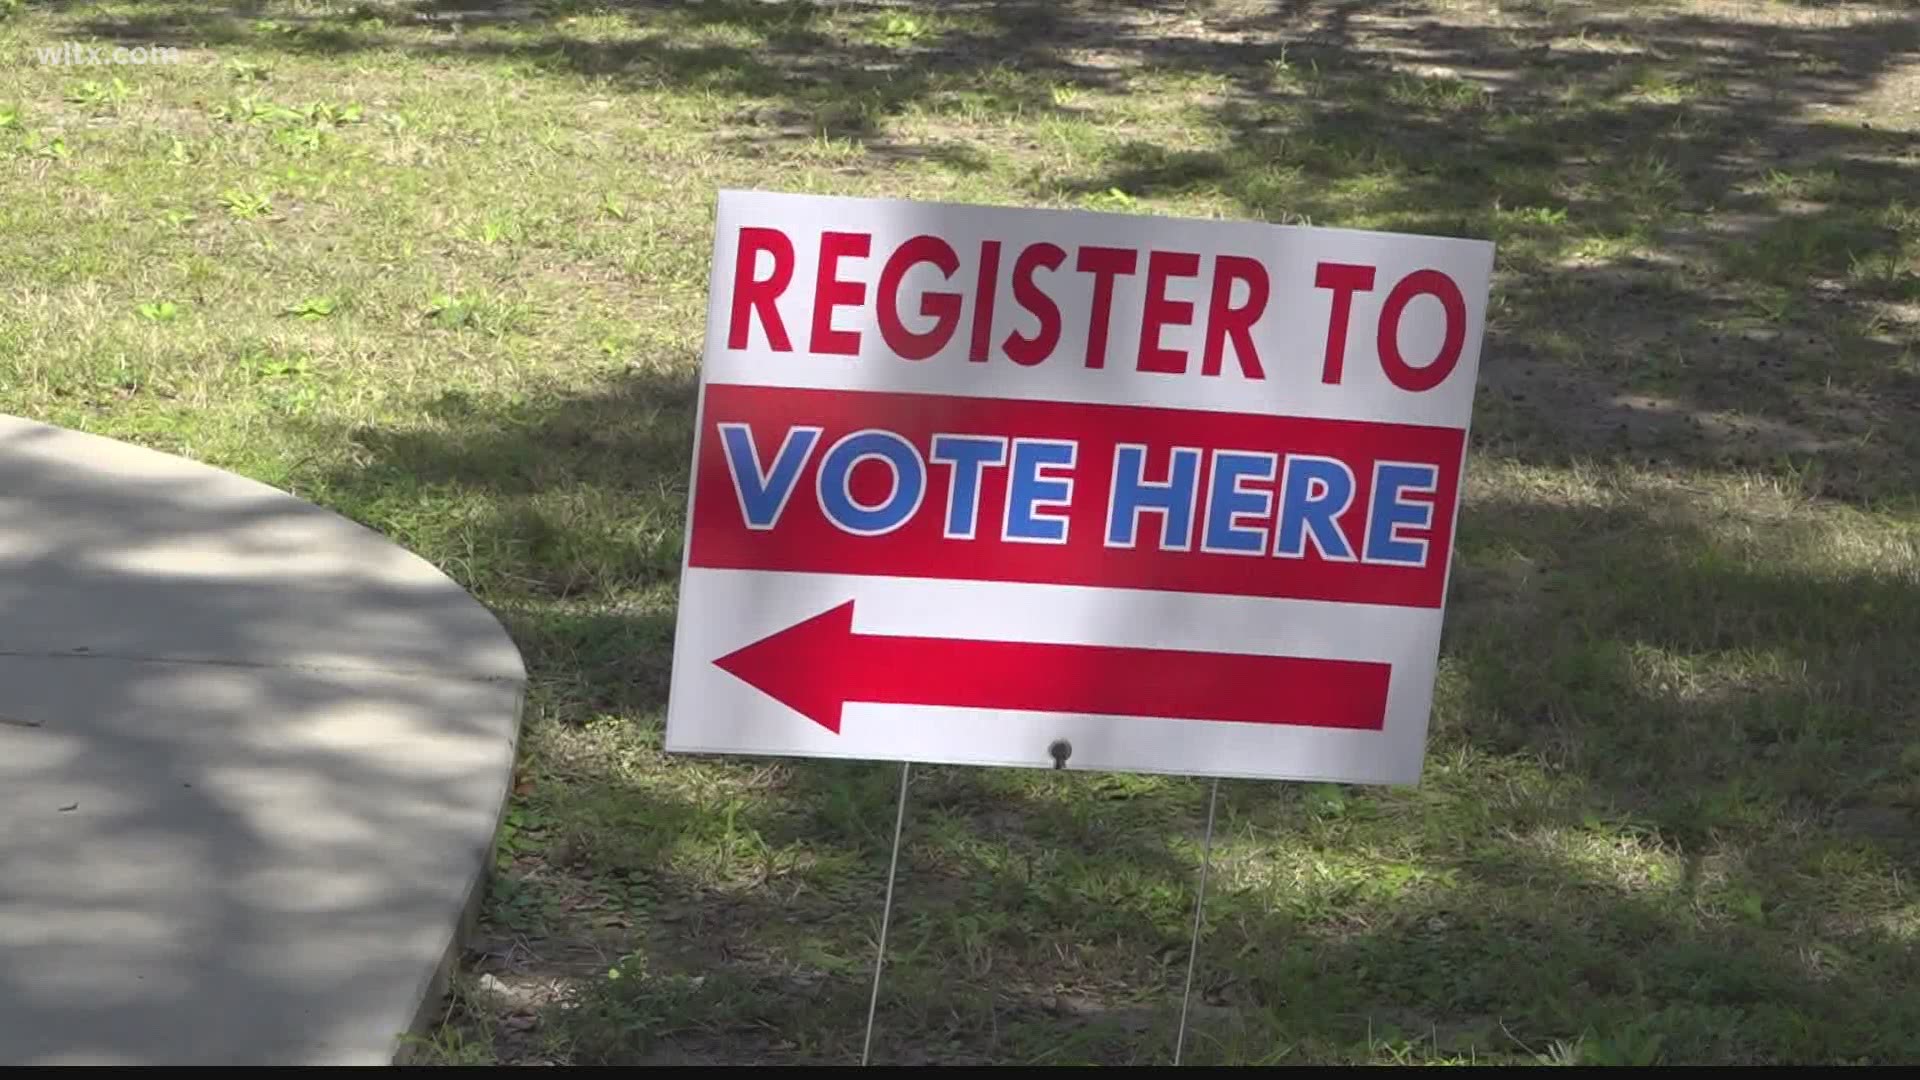 Sumter County has seen a record number of folks to vote absentee, they are opening four new locations to vote.